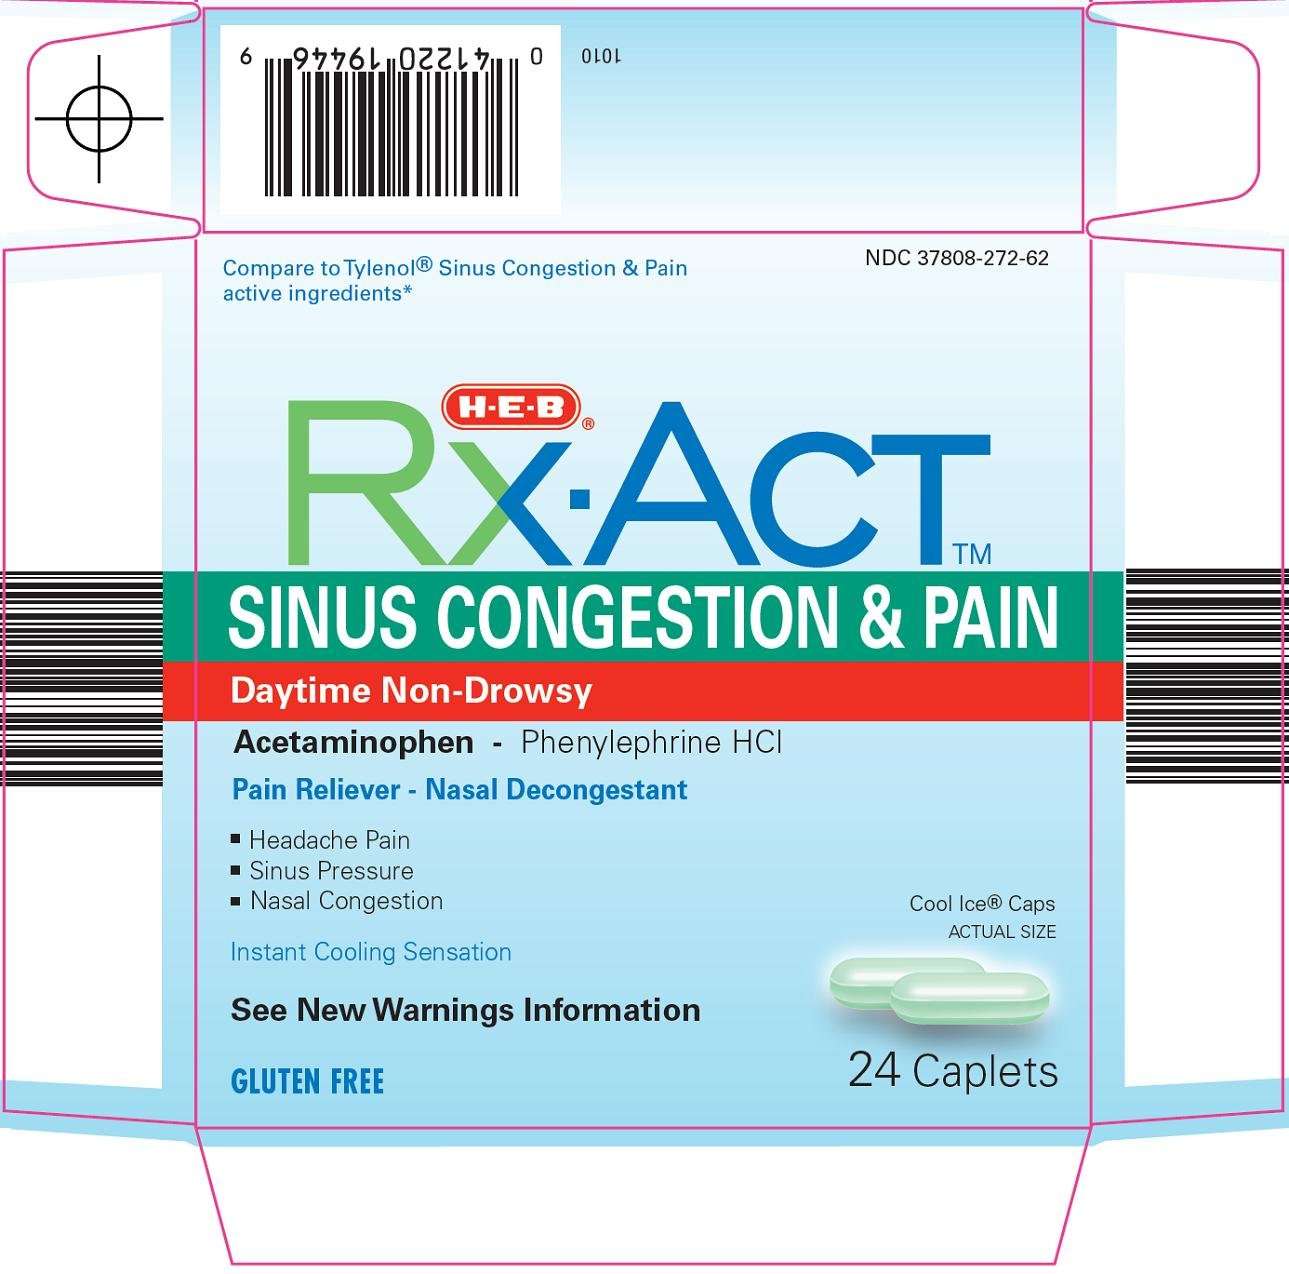 Rx Act sinus congestion and pain